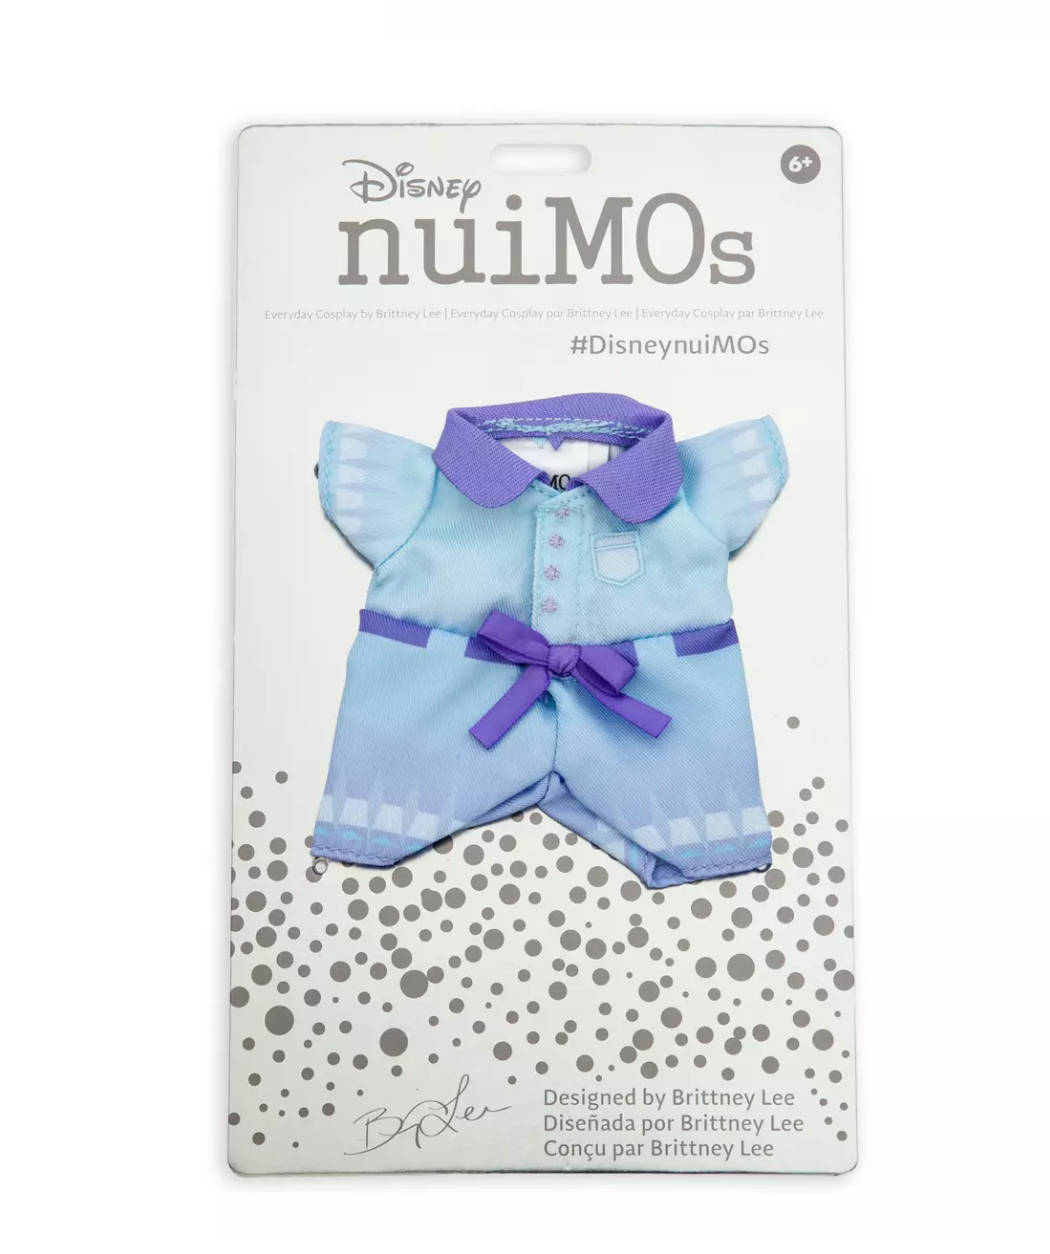 Disney NuiMOs Outfit Frozen Blue Romper the Art of Brittney Lee New with Card